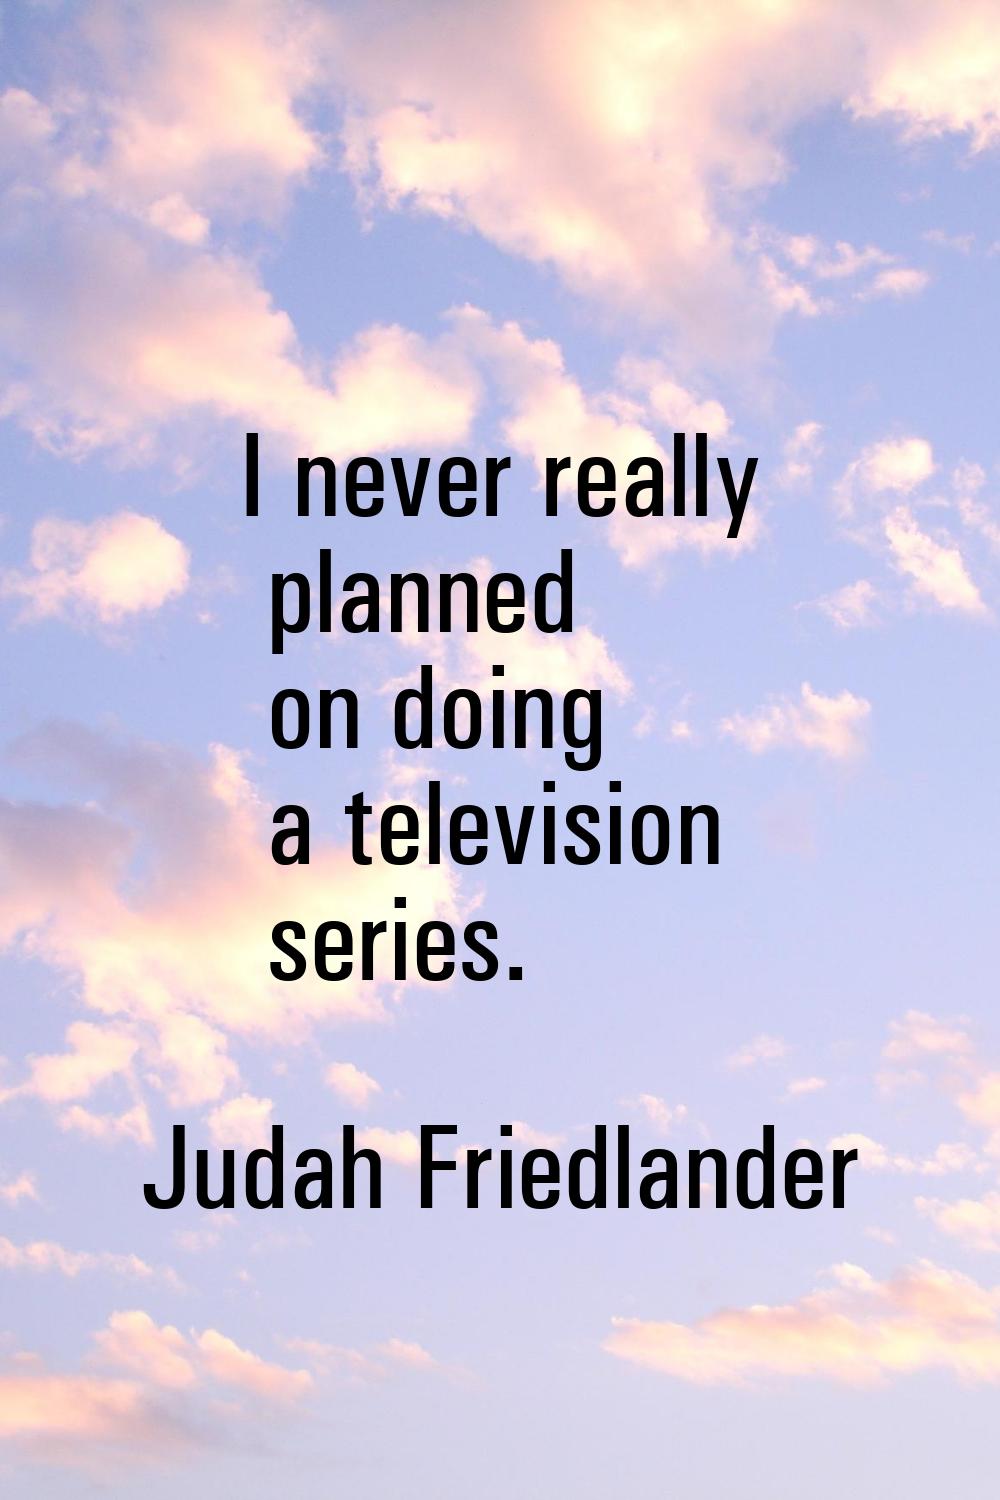 I never really planned on doing a television series.